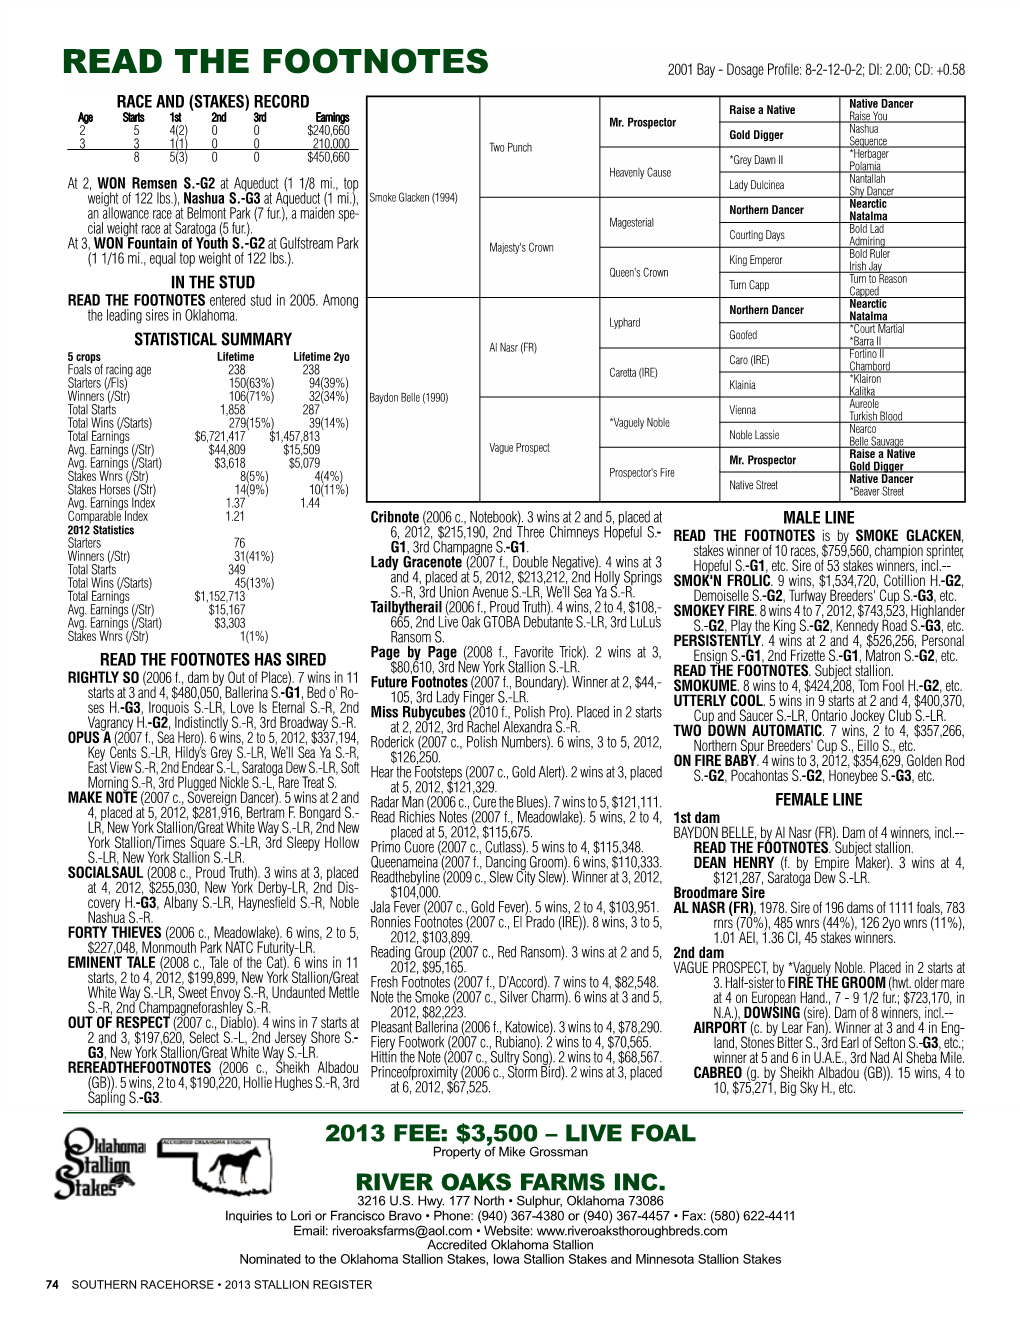 Read the Footnotes READ the FOOTNOTES Entered Stud in 2005